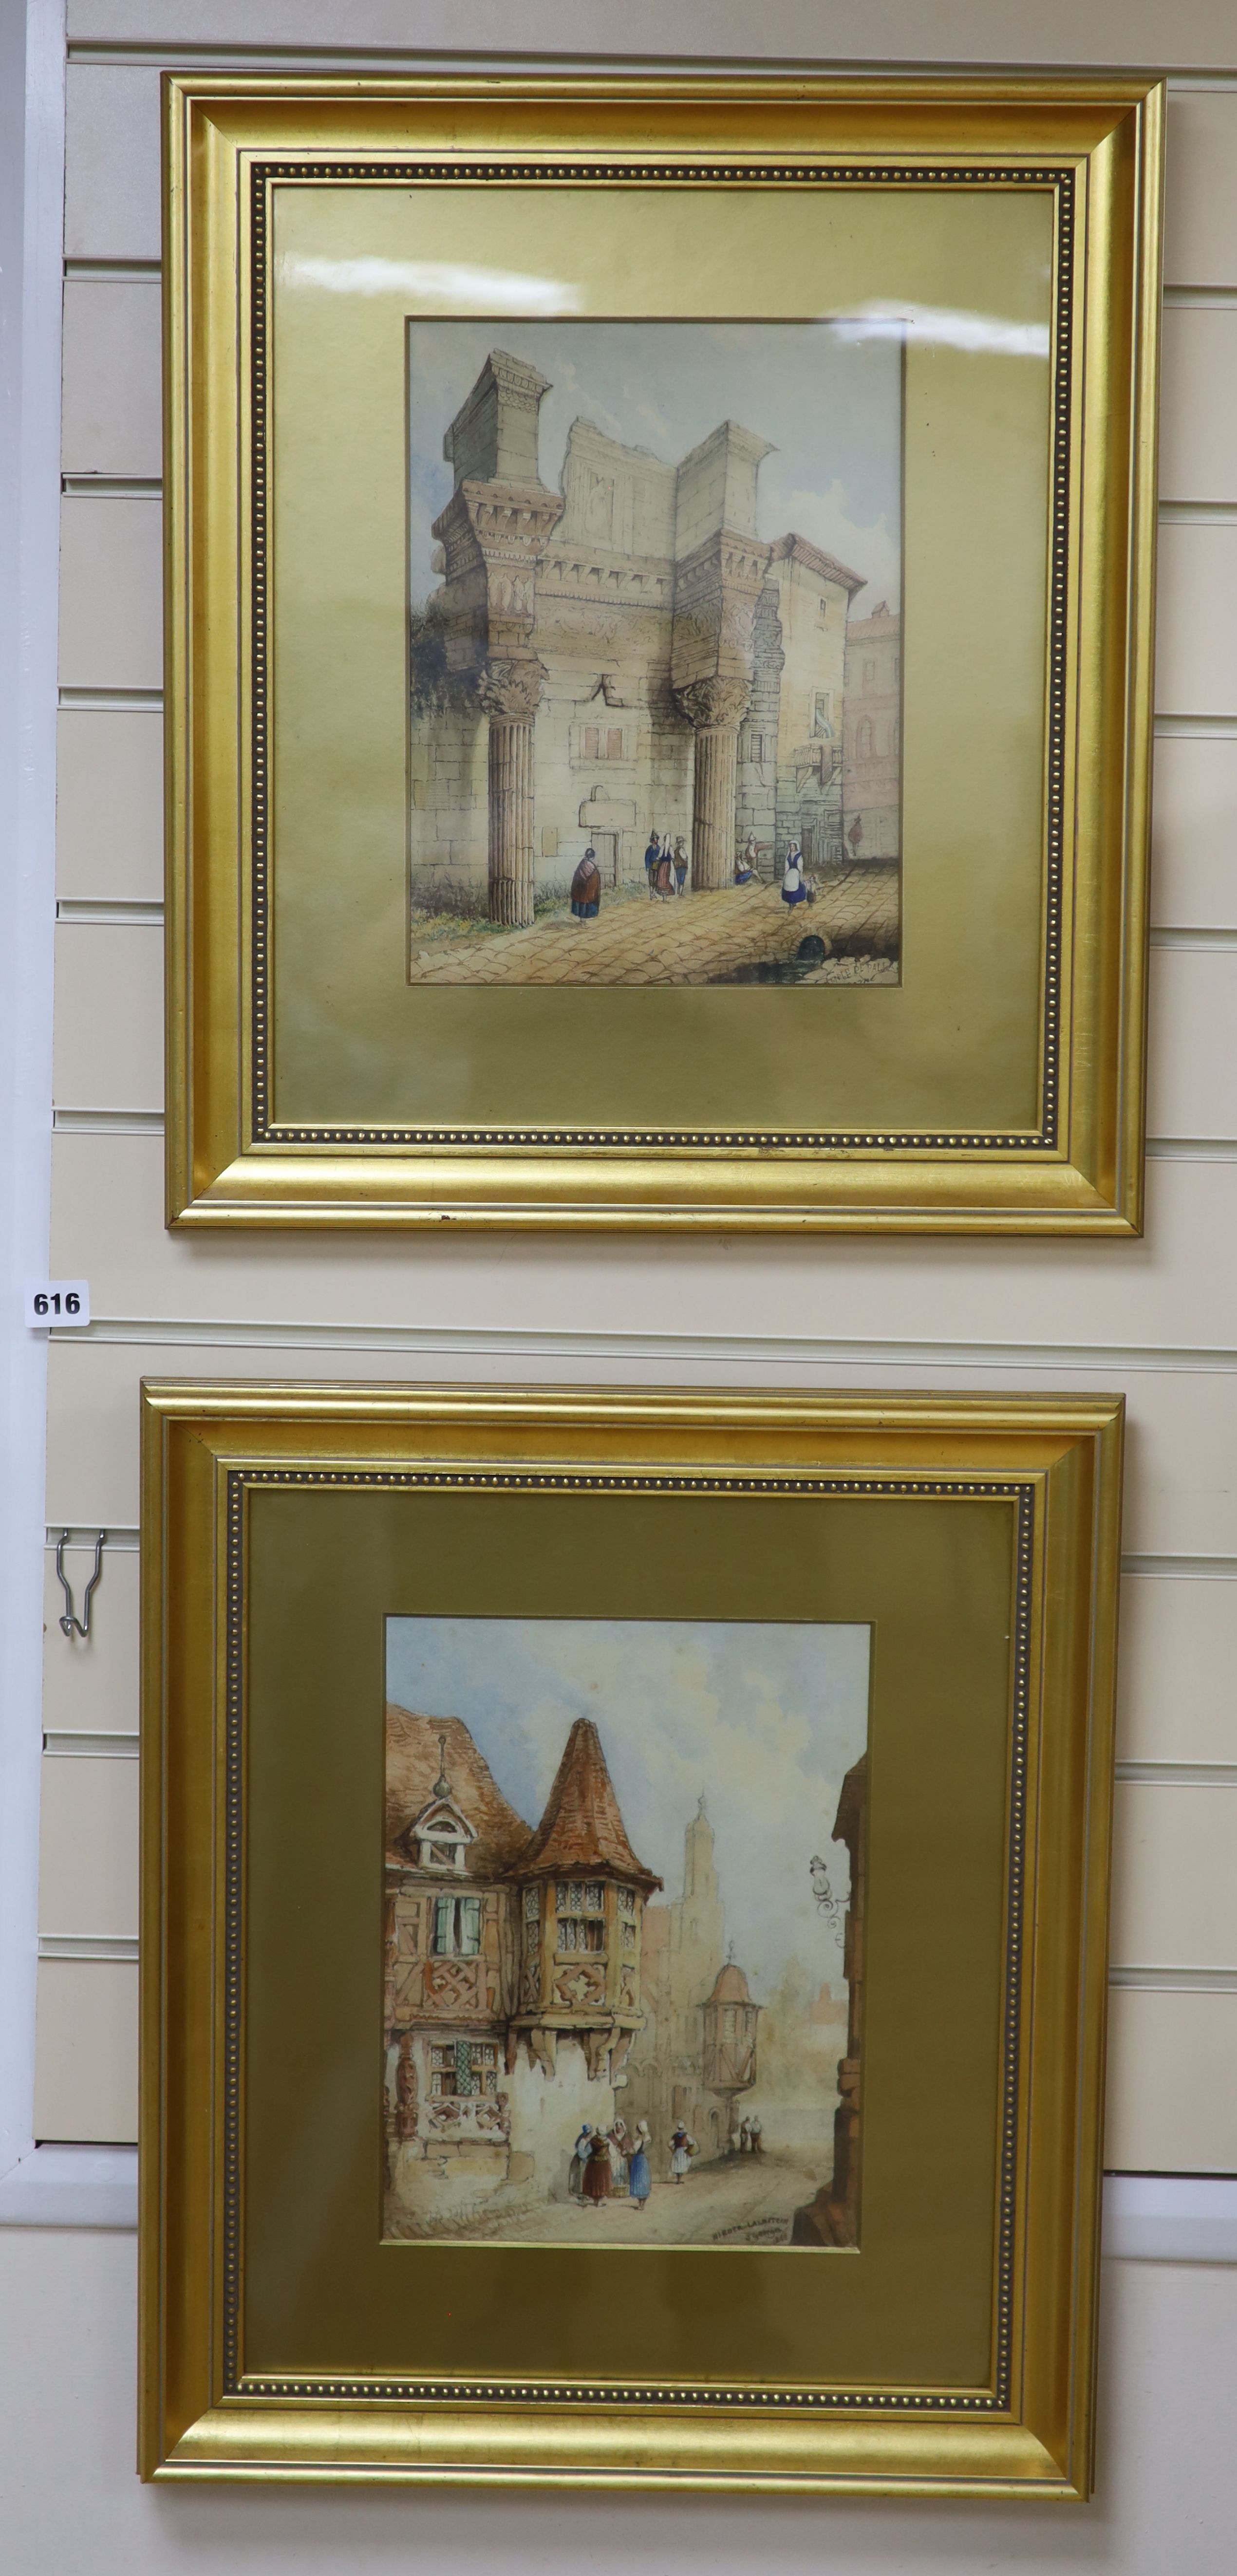 J. Georges, pair of watercolours, Street scenes, Depalla and Nirder-Lalmstein, one signed and dated 1842, 31 x 23cm